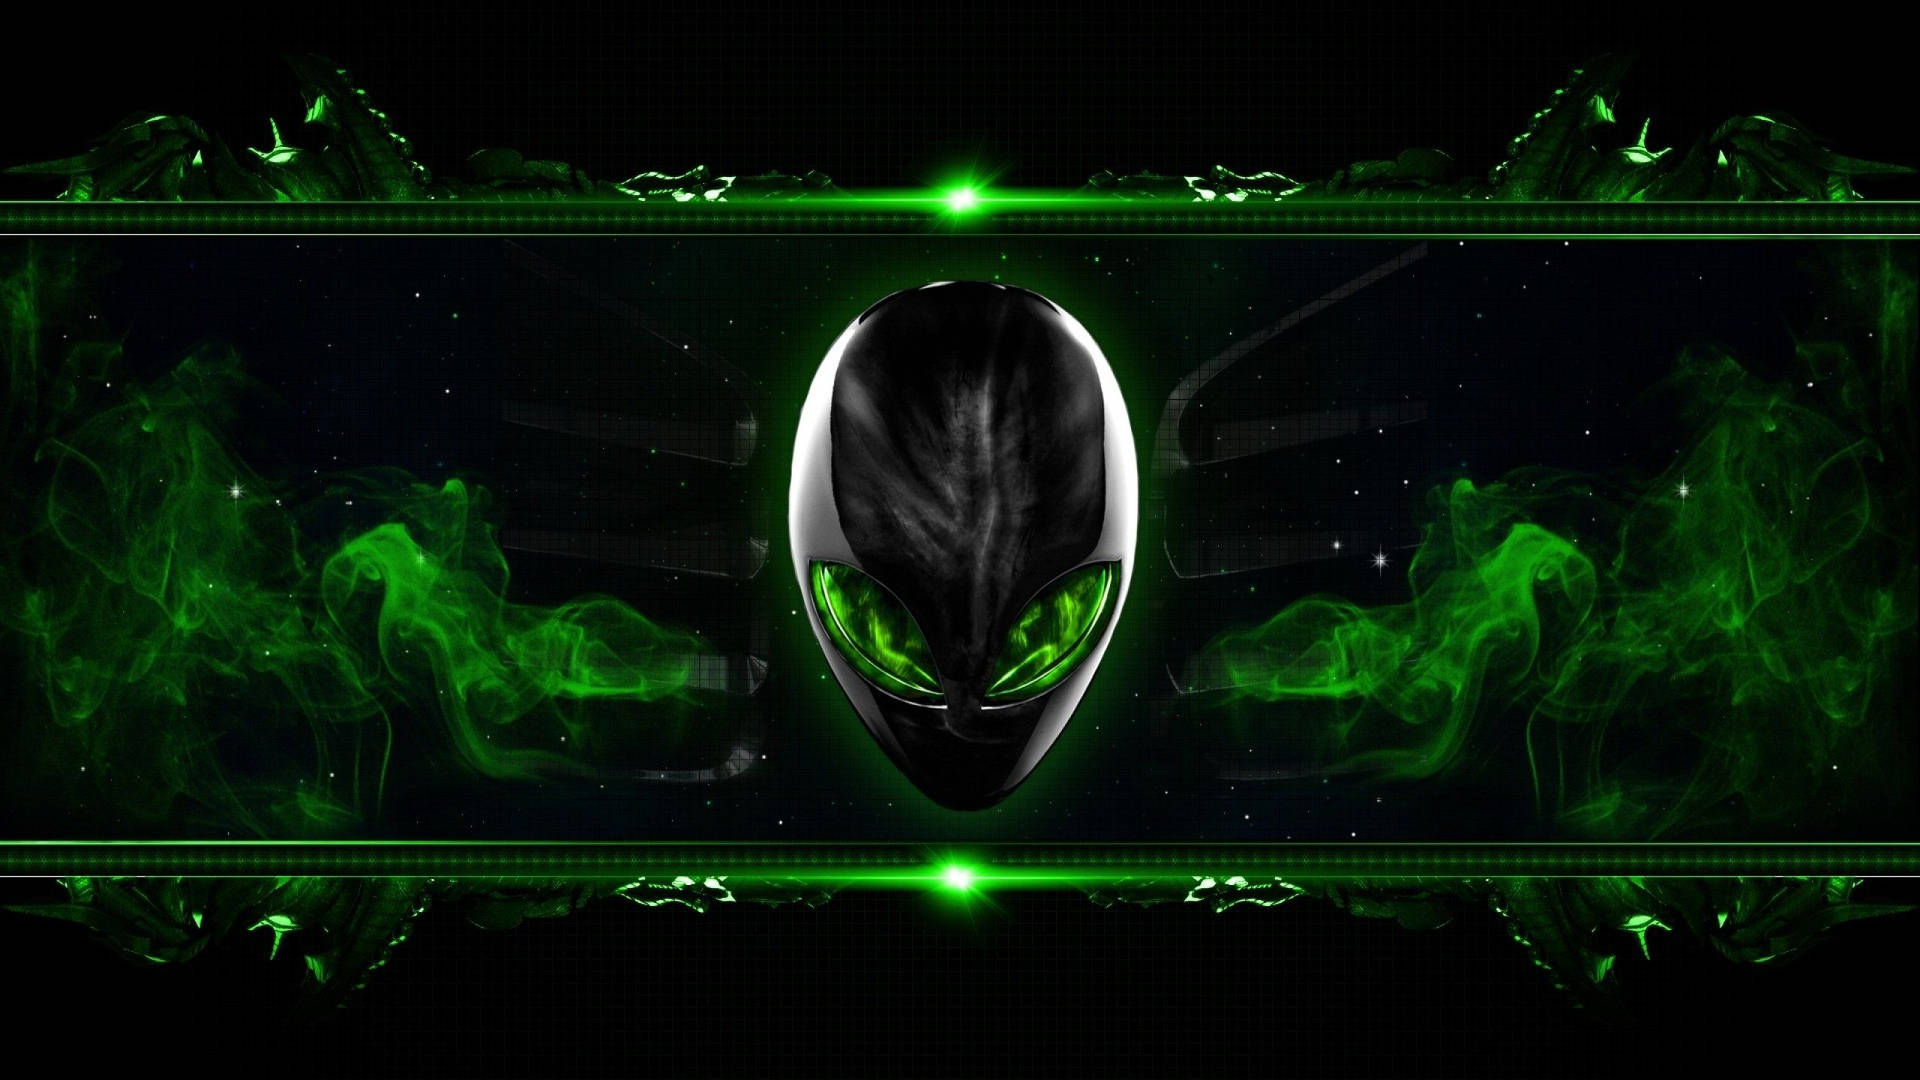 Get ready for your journey through a world of gaming and technology with Alienware Wallpaper